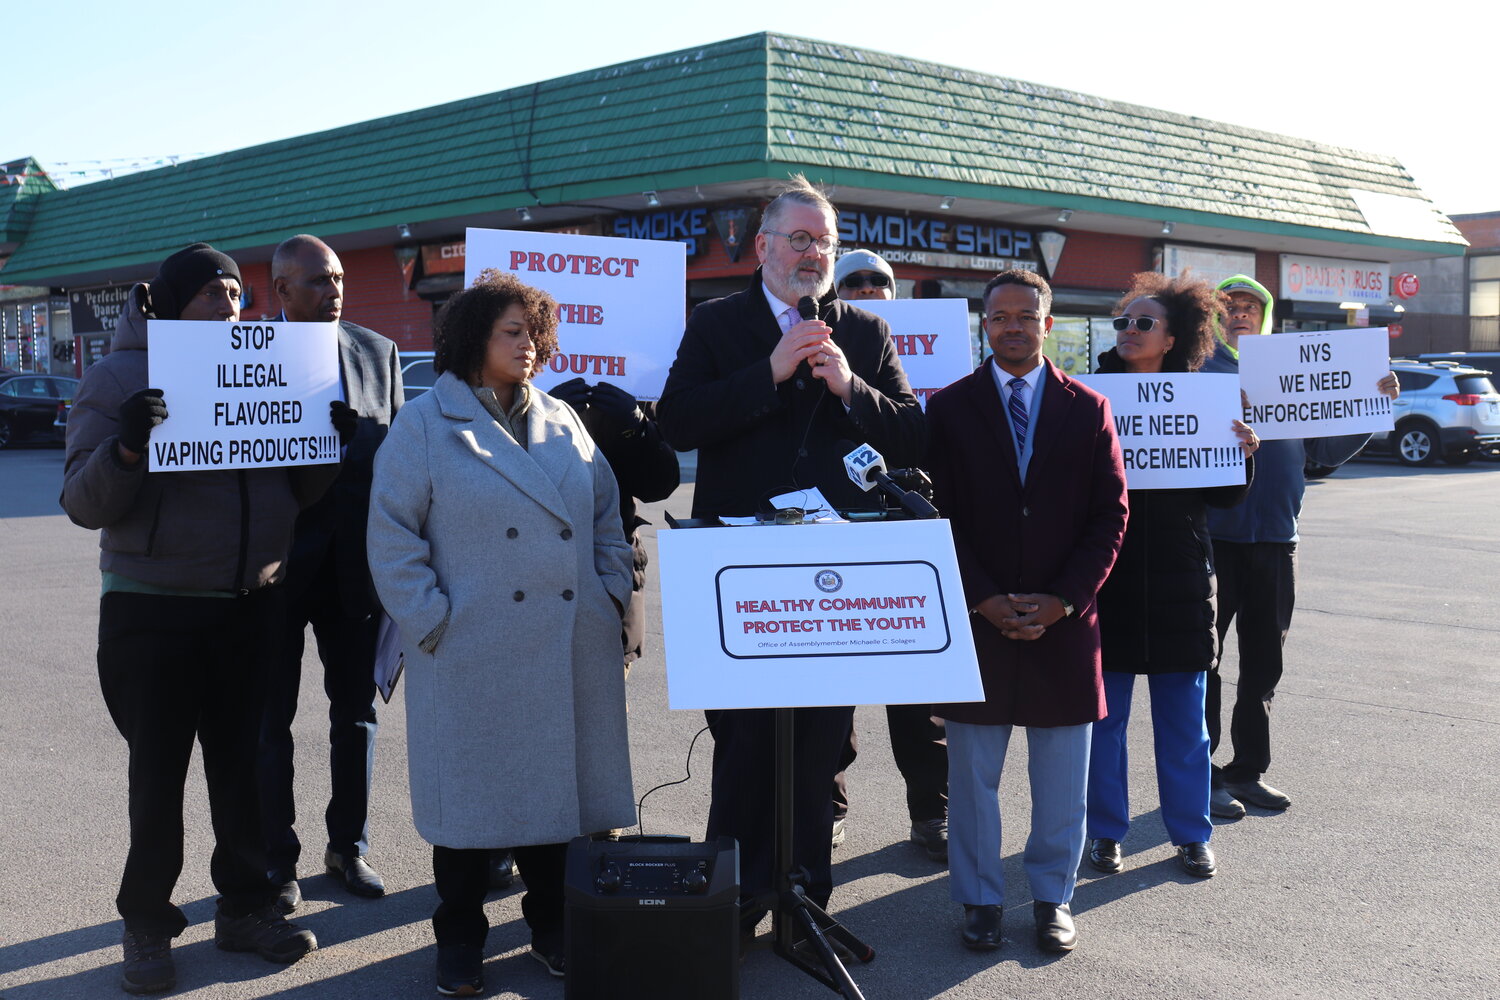 New York Association of Convenience Stores president Kent Sopris, Assemblywoman Michaelle Solages, County Legislator Carrié Solages and members of the Elmont community call on Gov. Kathy Hochul and the state legislature to crack down on flavored vape products.